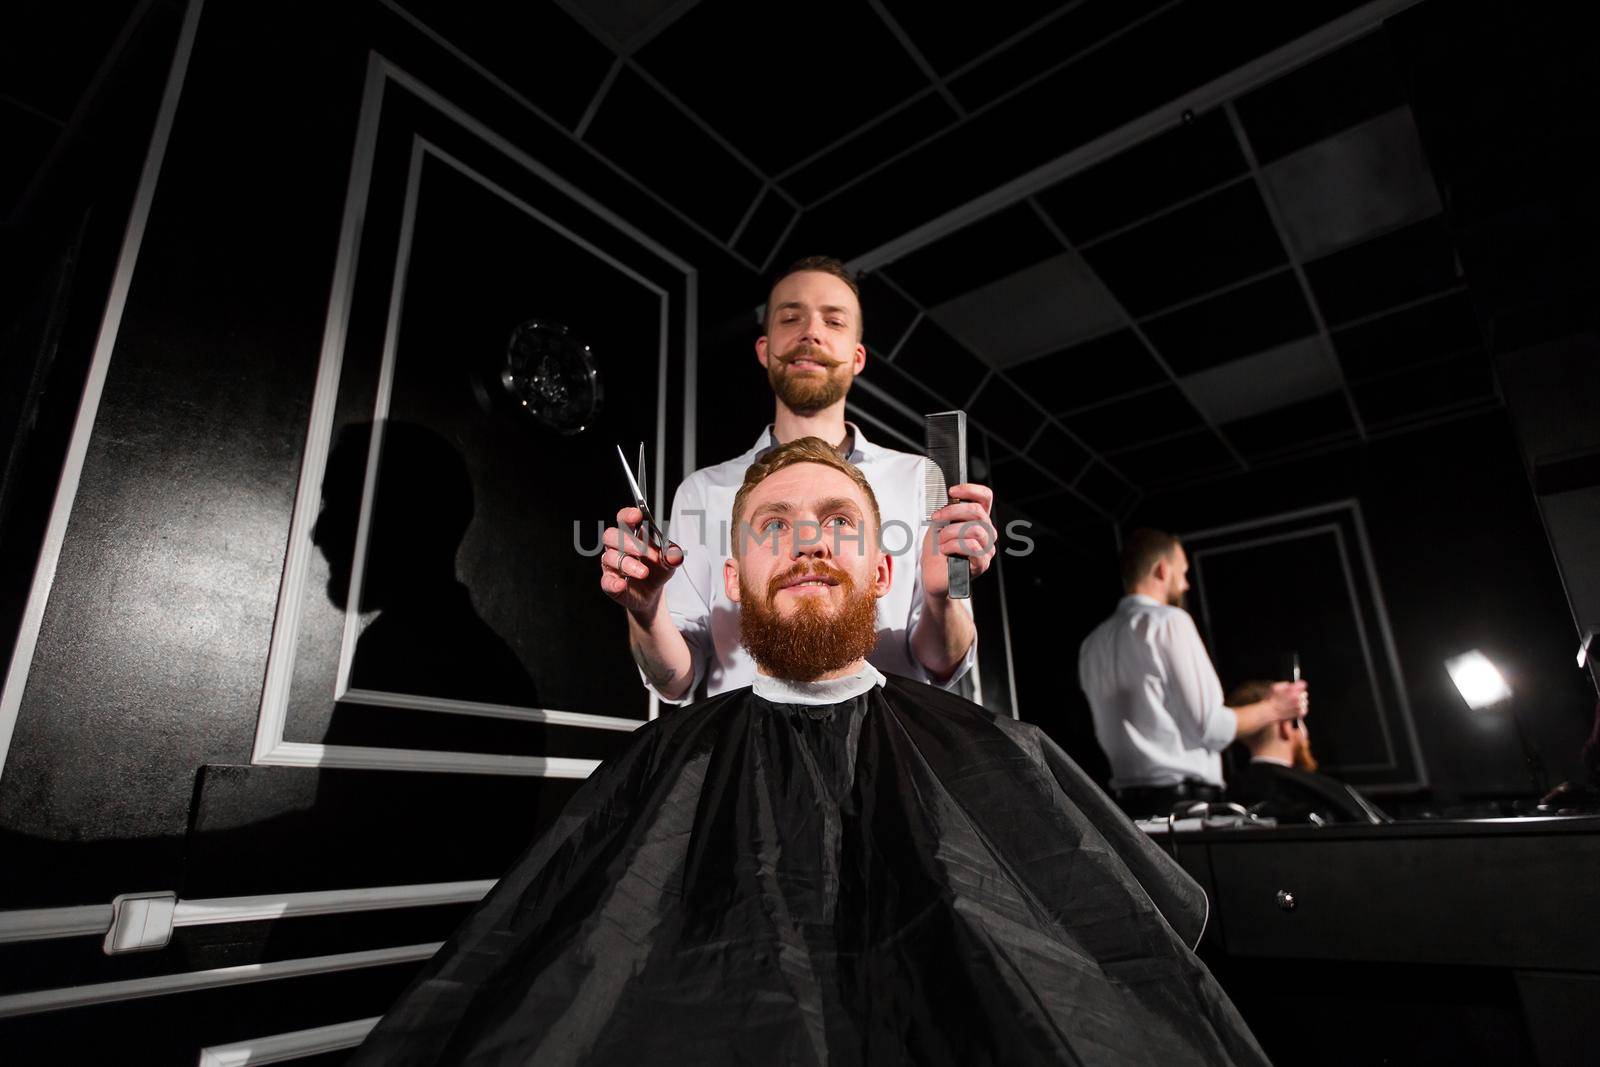 Master cuts hair and beard in the Barber shop. Hairdresser makes hairstyle using scissors and a metal comb